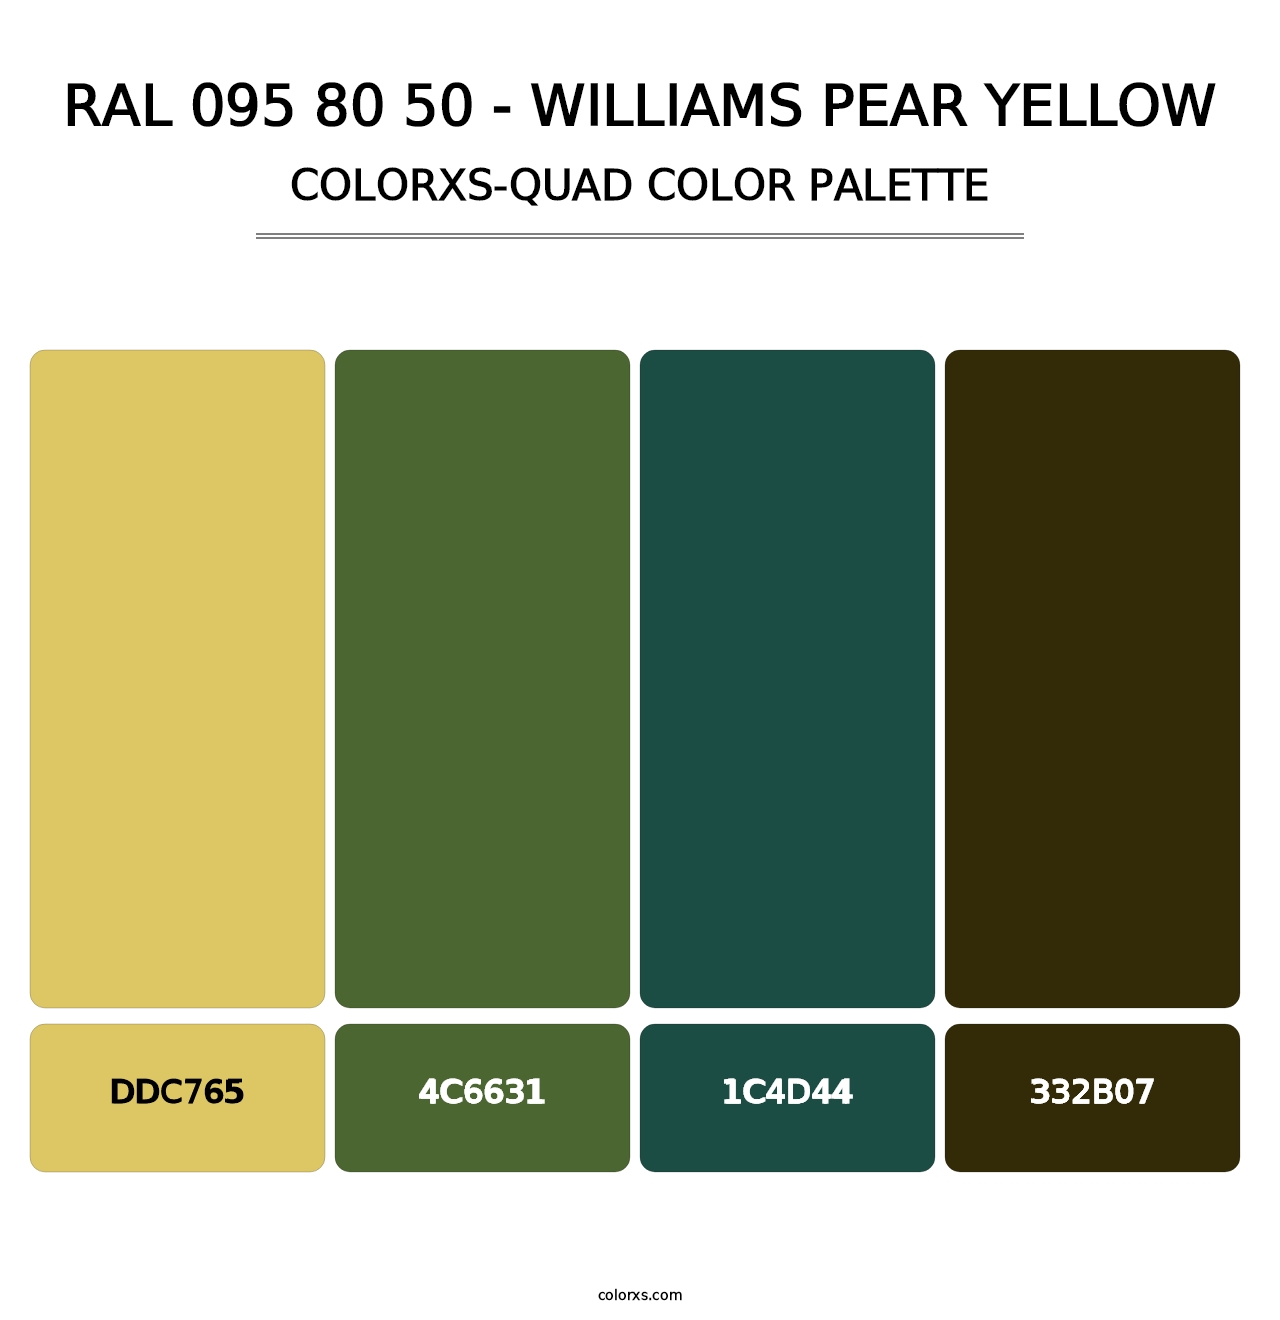 RAL 095 80 50 - Williams Pear Yellow - Colorxs Quad Palette